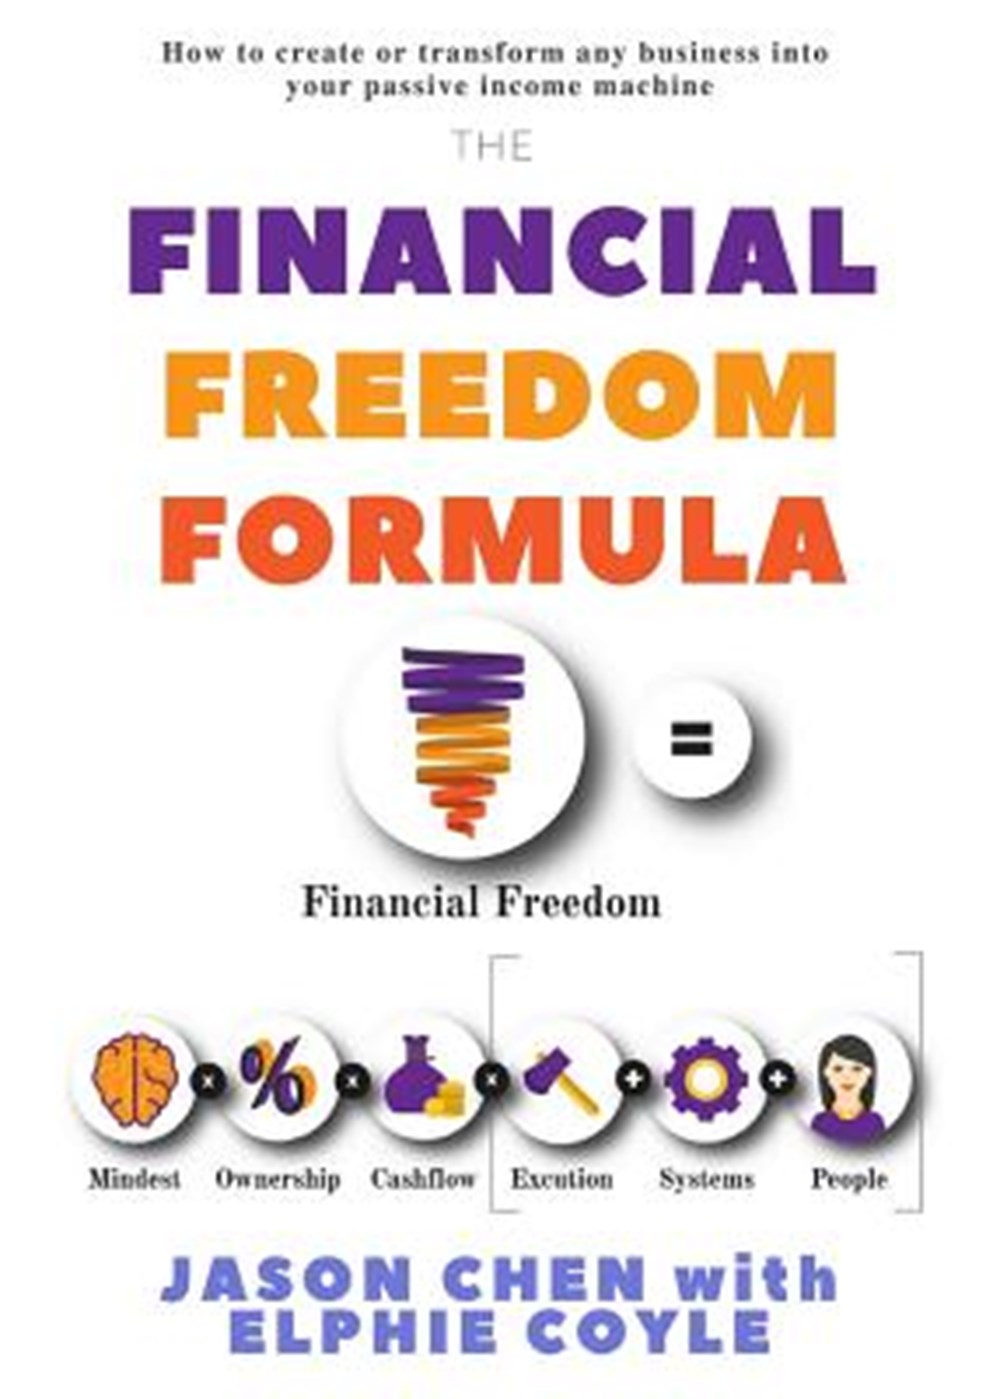 Financial Freedom Formula A step by step guide to the formula of financial freedom, retracing mindse